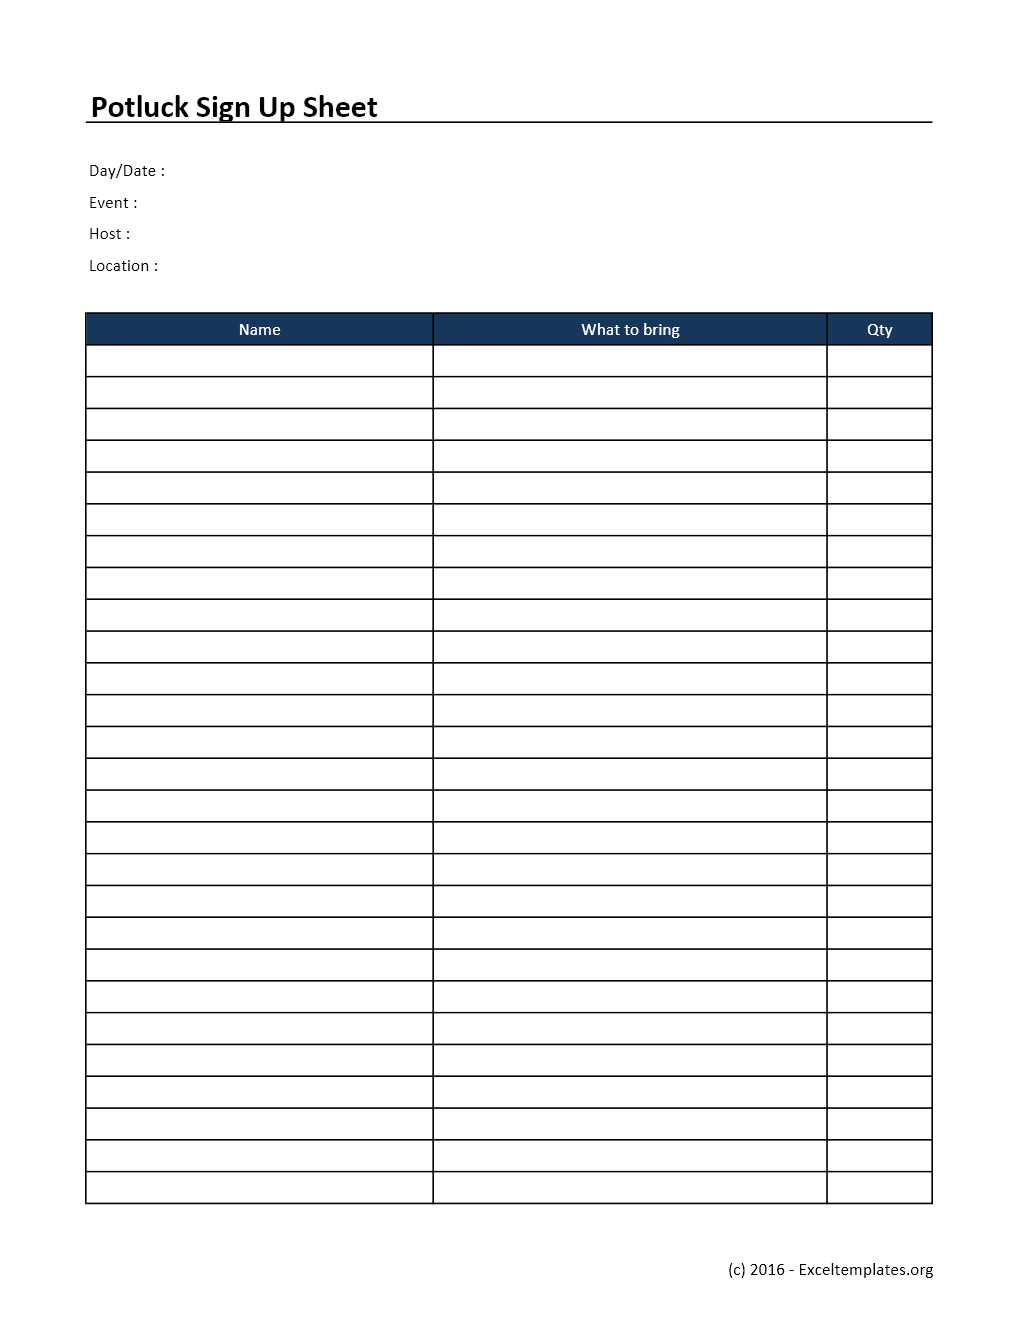 Potluck Sign Up Sheet Template Excel Templates Excel 